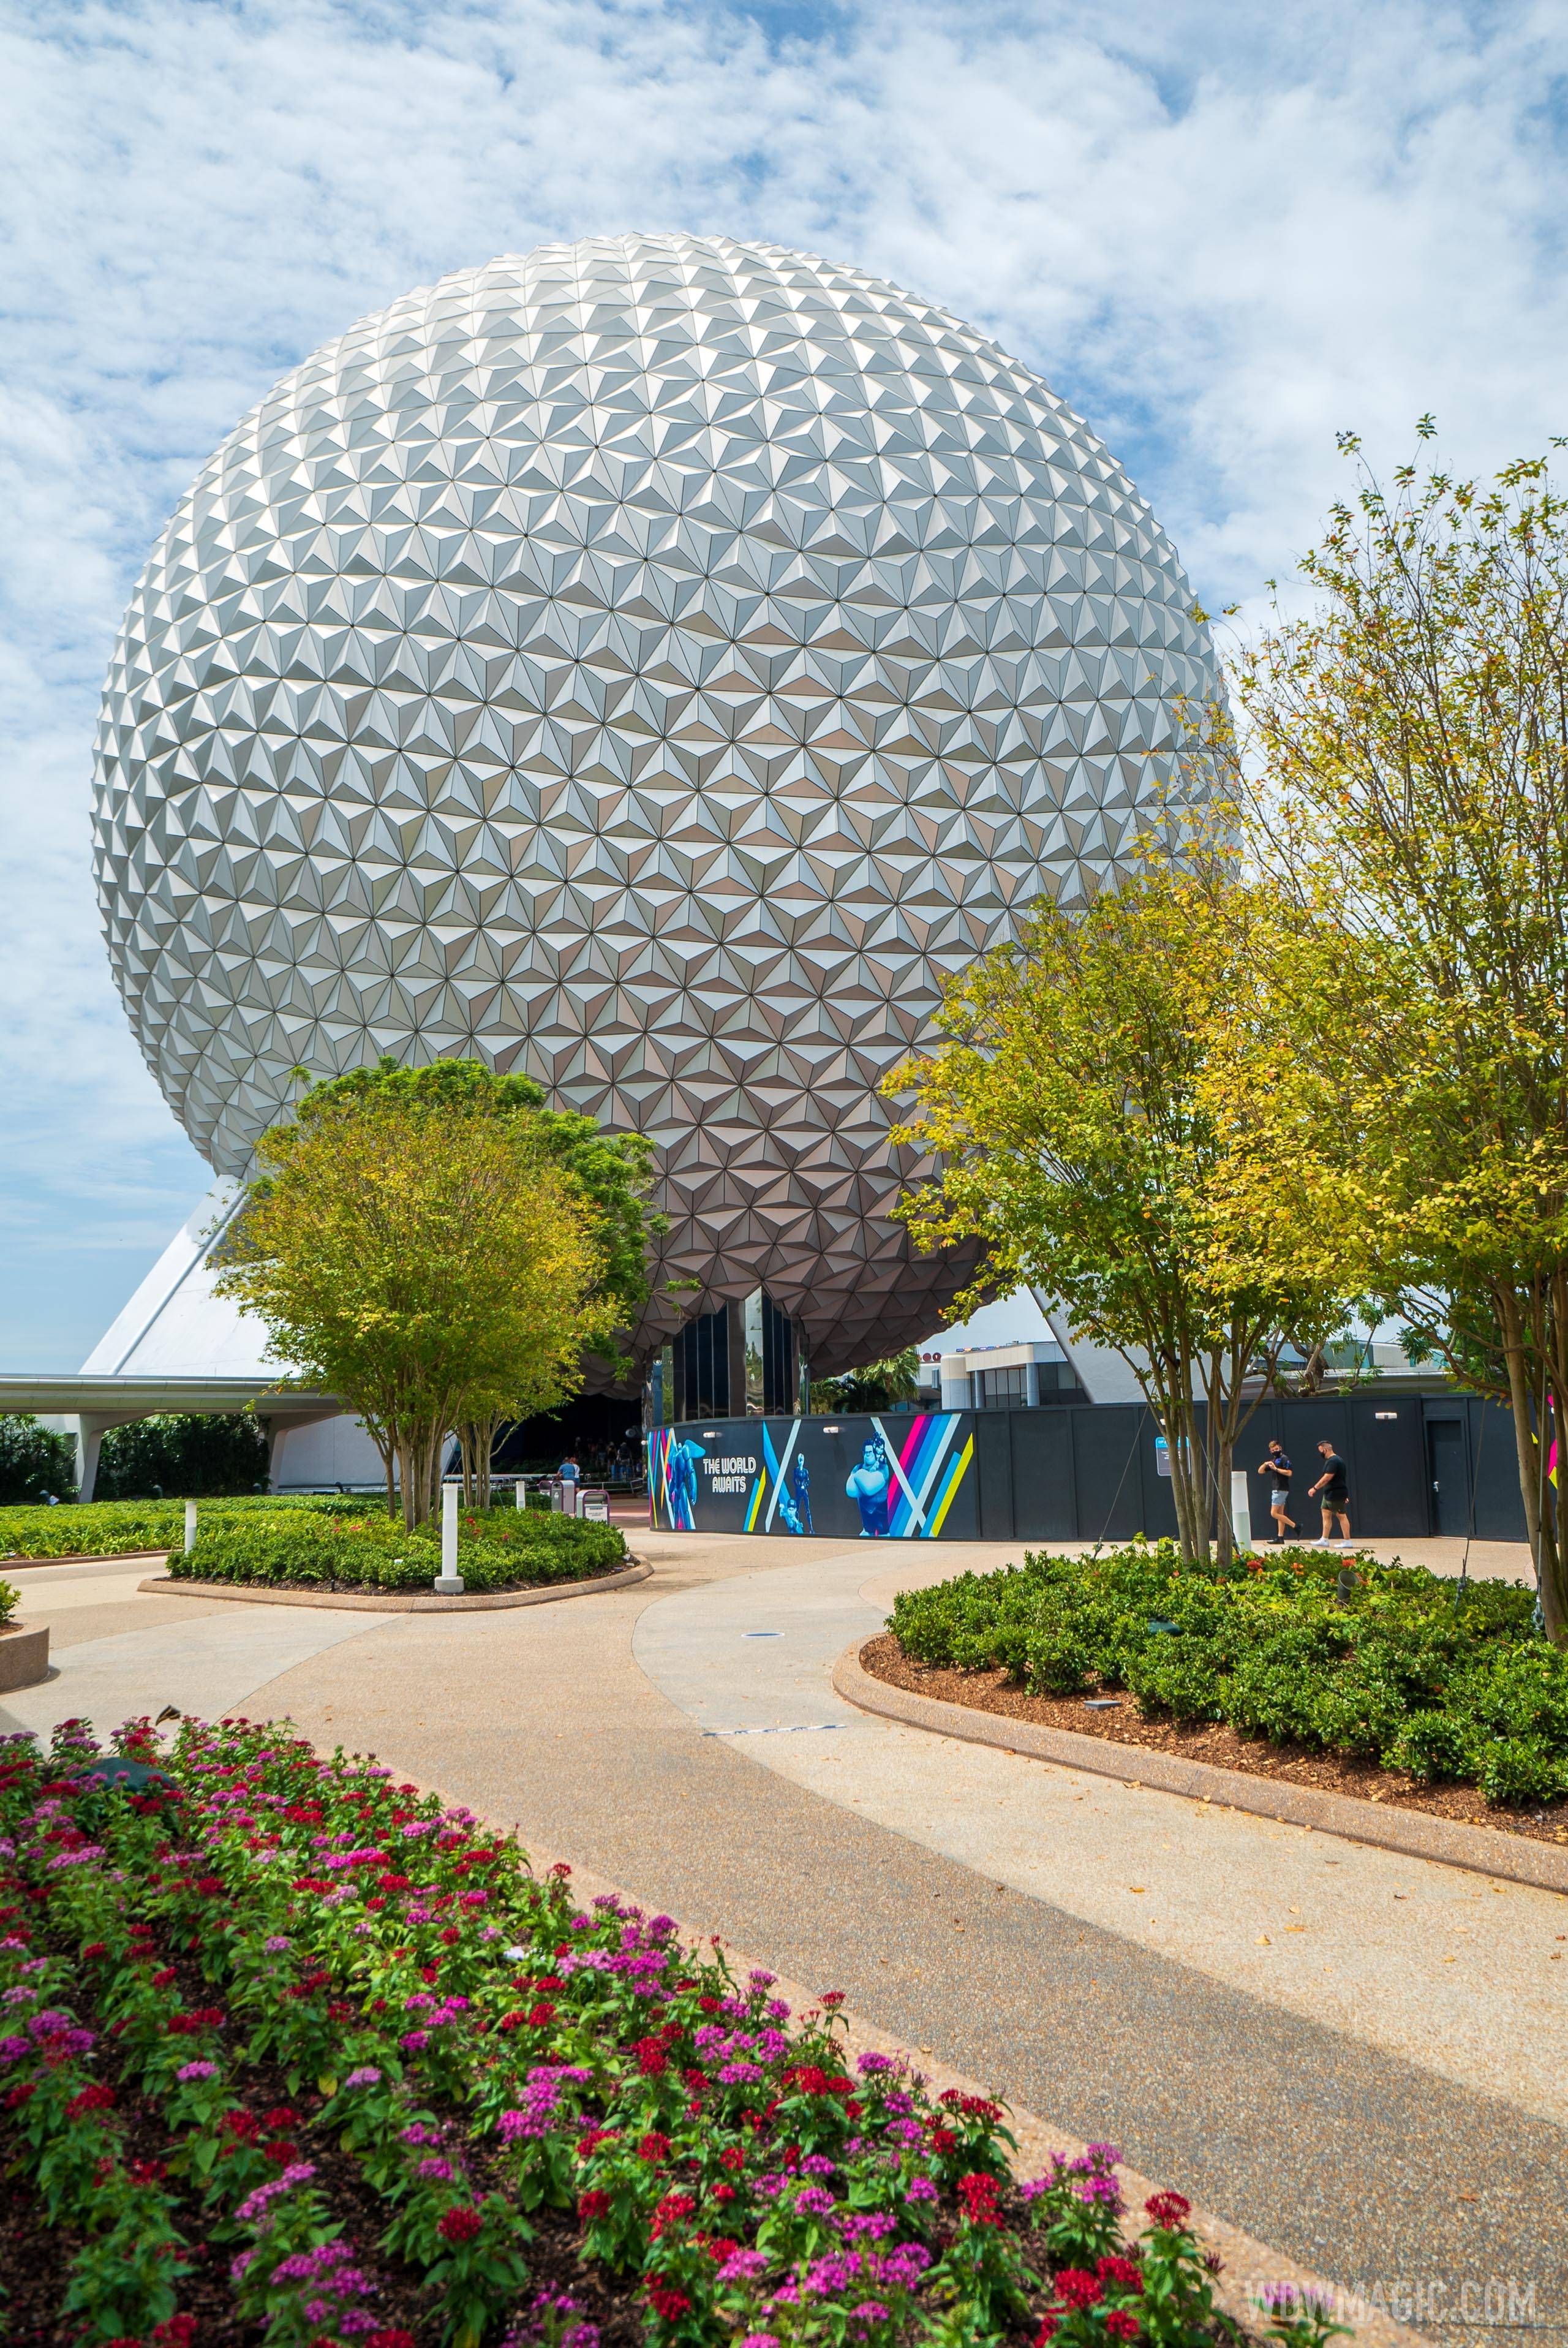 EPCOT is the only option for Annual Passholders for the remainder of August